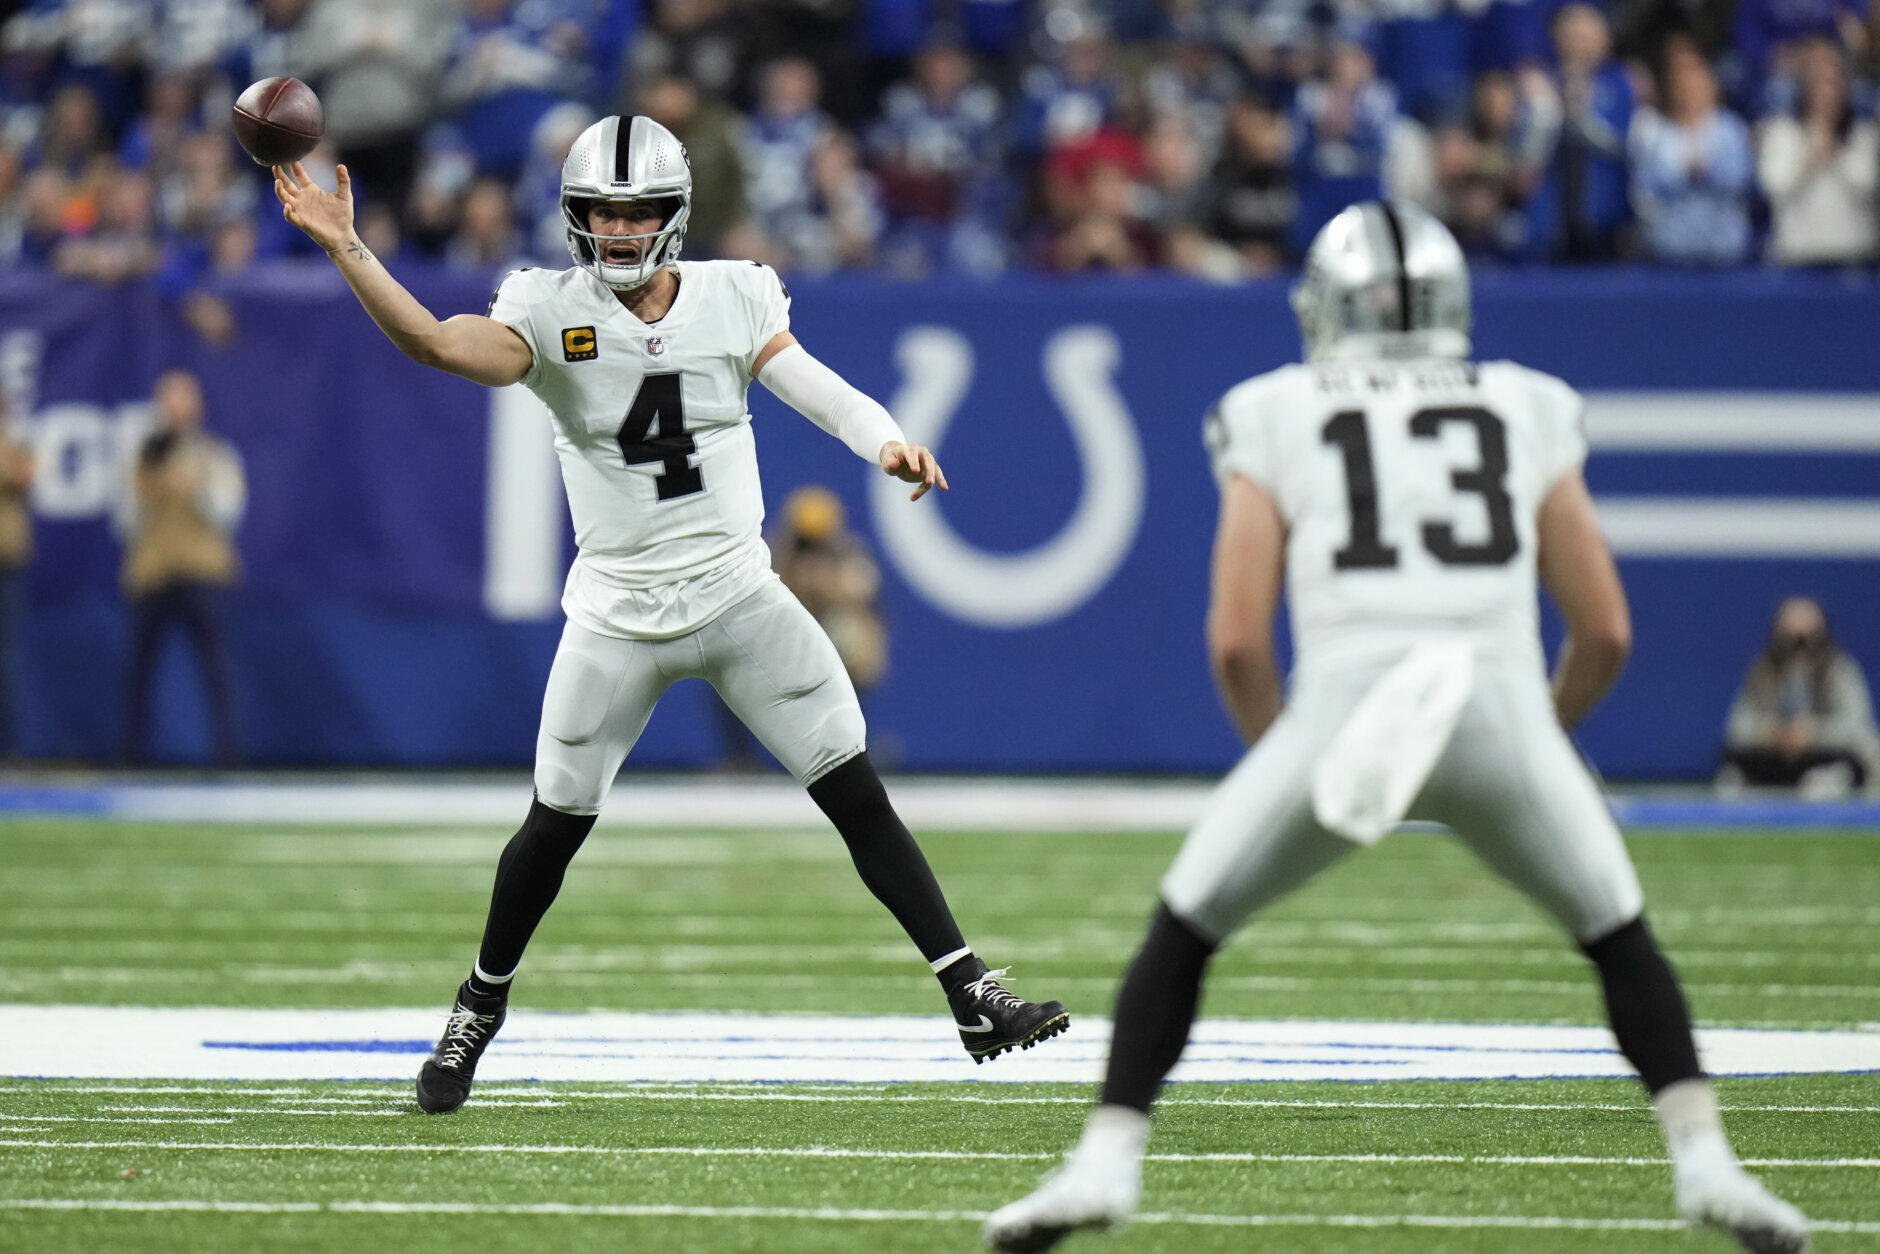 <p><em><strong>Raiders 23</strong></em><br />
<em><strong>Colts 20</strong></em></p>
<p>On a day in which the entire NFL remembered the late, great John Madden, the Silver and Black came back to ensure Las Vegas&#8217; first Week 18 will be meaningful.</p>
<p>In a separate Raiders homage, does anyone else notice that the longer Derek Carr&#8217;s hair gets, the more he looks like Lyle Alzado?</p>
<blockquote class="twitter-tweet" data-width="500" data-dnt="true">
<p lang="en" dir="ltr">How come Derek Carr looks like Lyle Alzado <a href="https://twitter.com/hashtag/travelingcoach56?src=hash&amp;ref_src=twsrc%5Etfw">#travelingcoach56</a> <a href="https://t.co/HOj4w9ZHGq">pic.twitter.com/HOj4w9ZHGq</a></p>
<p>&mdash; C_Mascolo (@traveling_coach) <a href="https://twitter.com/traveling_coach/status/1457417333409001473?ref_src=twsrc%5Etfw">November 7, 2021</a></p></blockquote>
<p><script async src="https://platform.twitter.com/widgets.js" charset="utf-8"></script></p>
